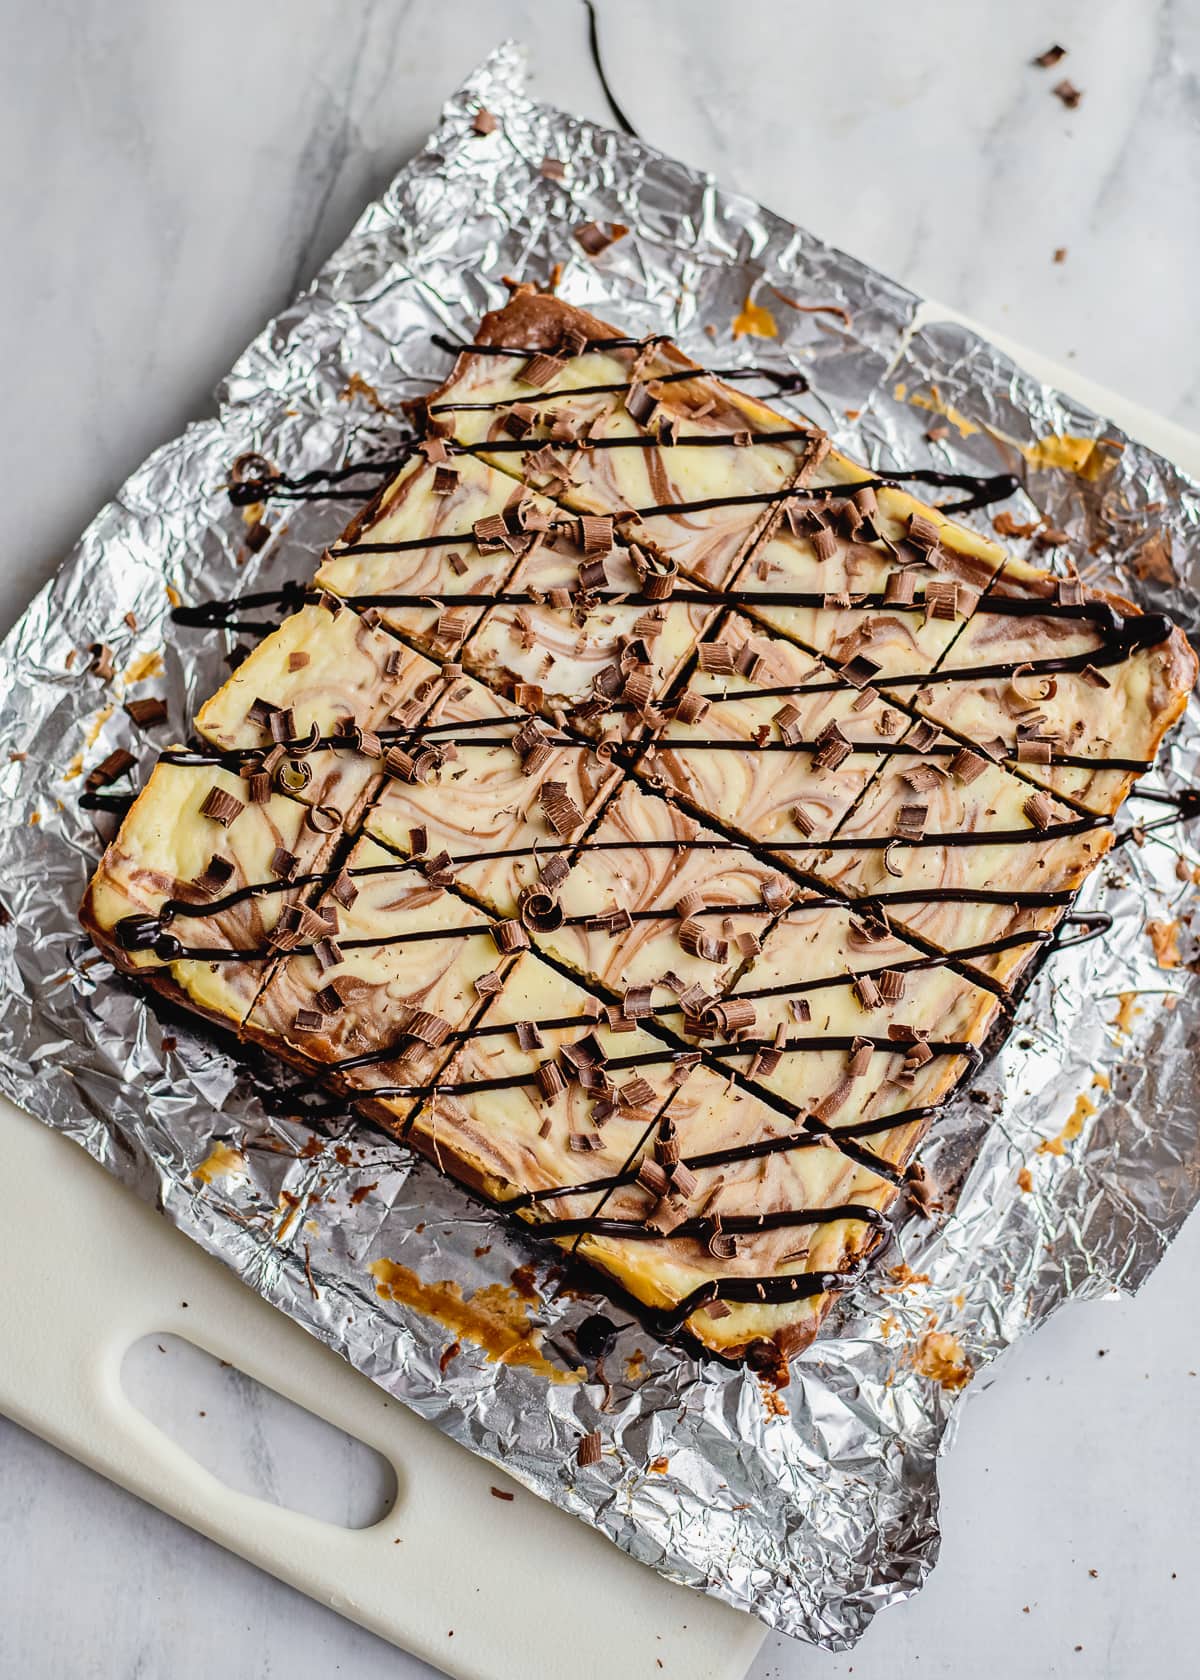 cheesecake bars sliced with chocolate drizzle.